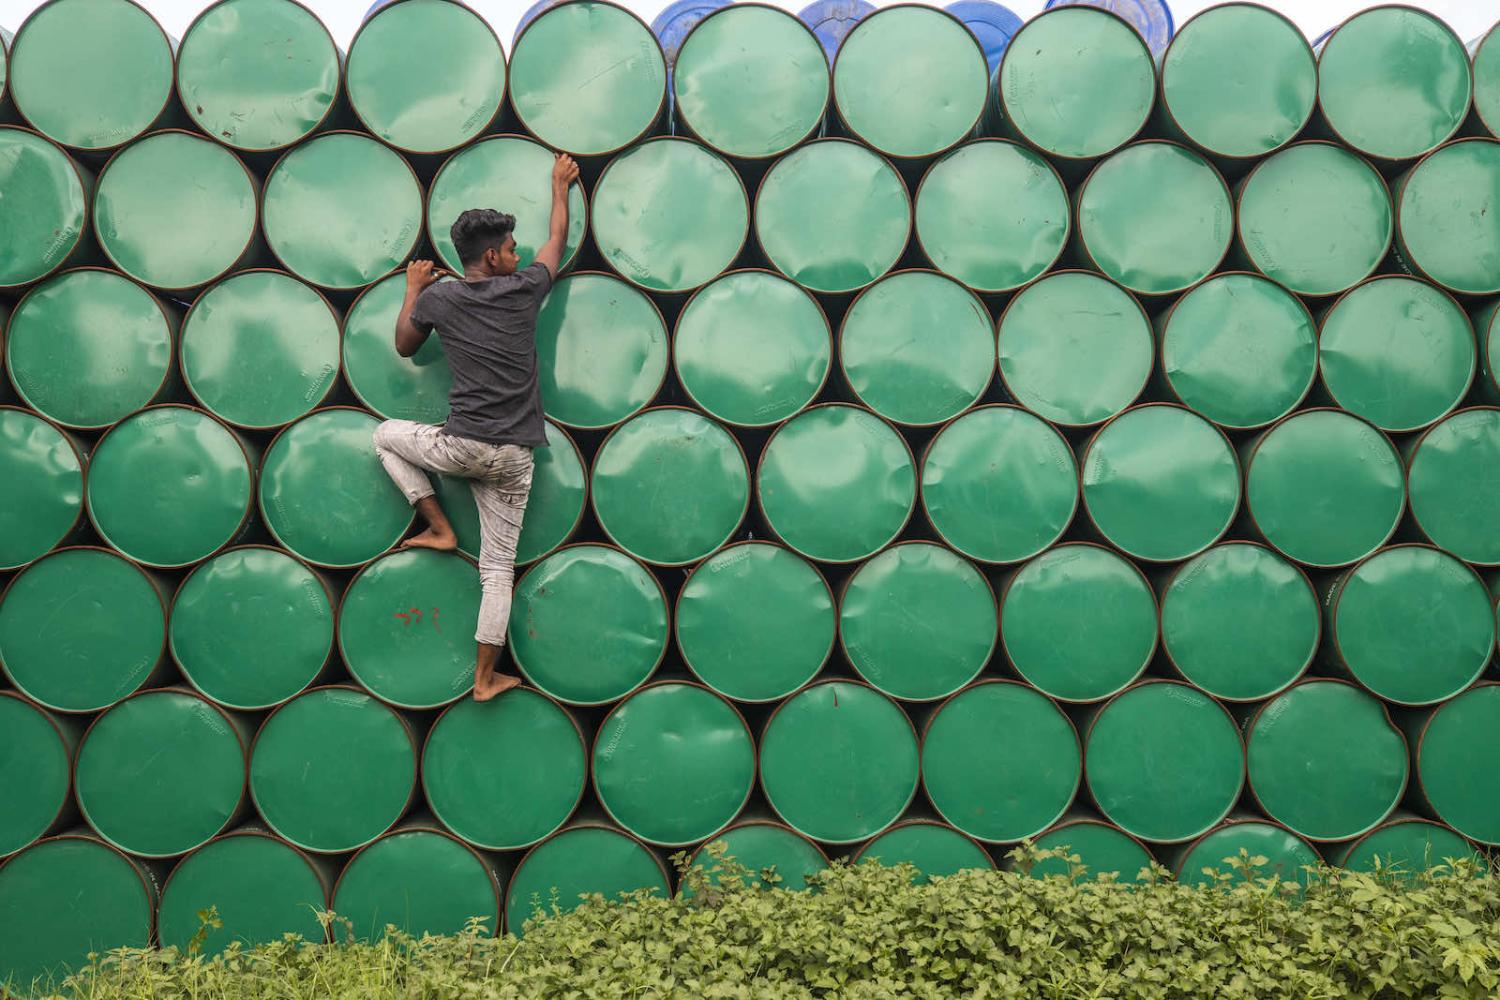 Empty oil drums at a warehouse in Narayanganj on 19 May (Ahmed Salahuddin/NurPhoto via Getty Images)